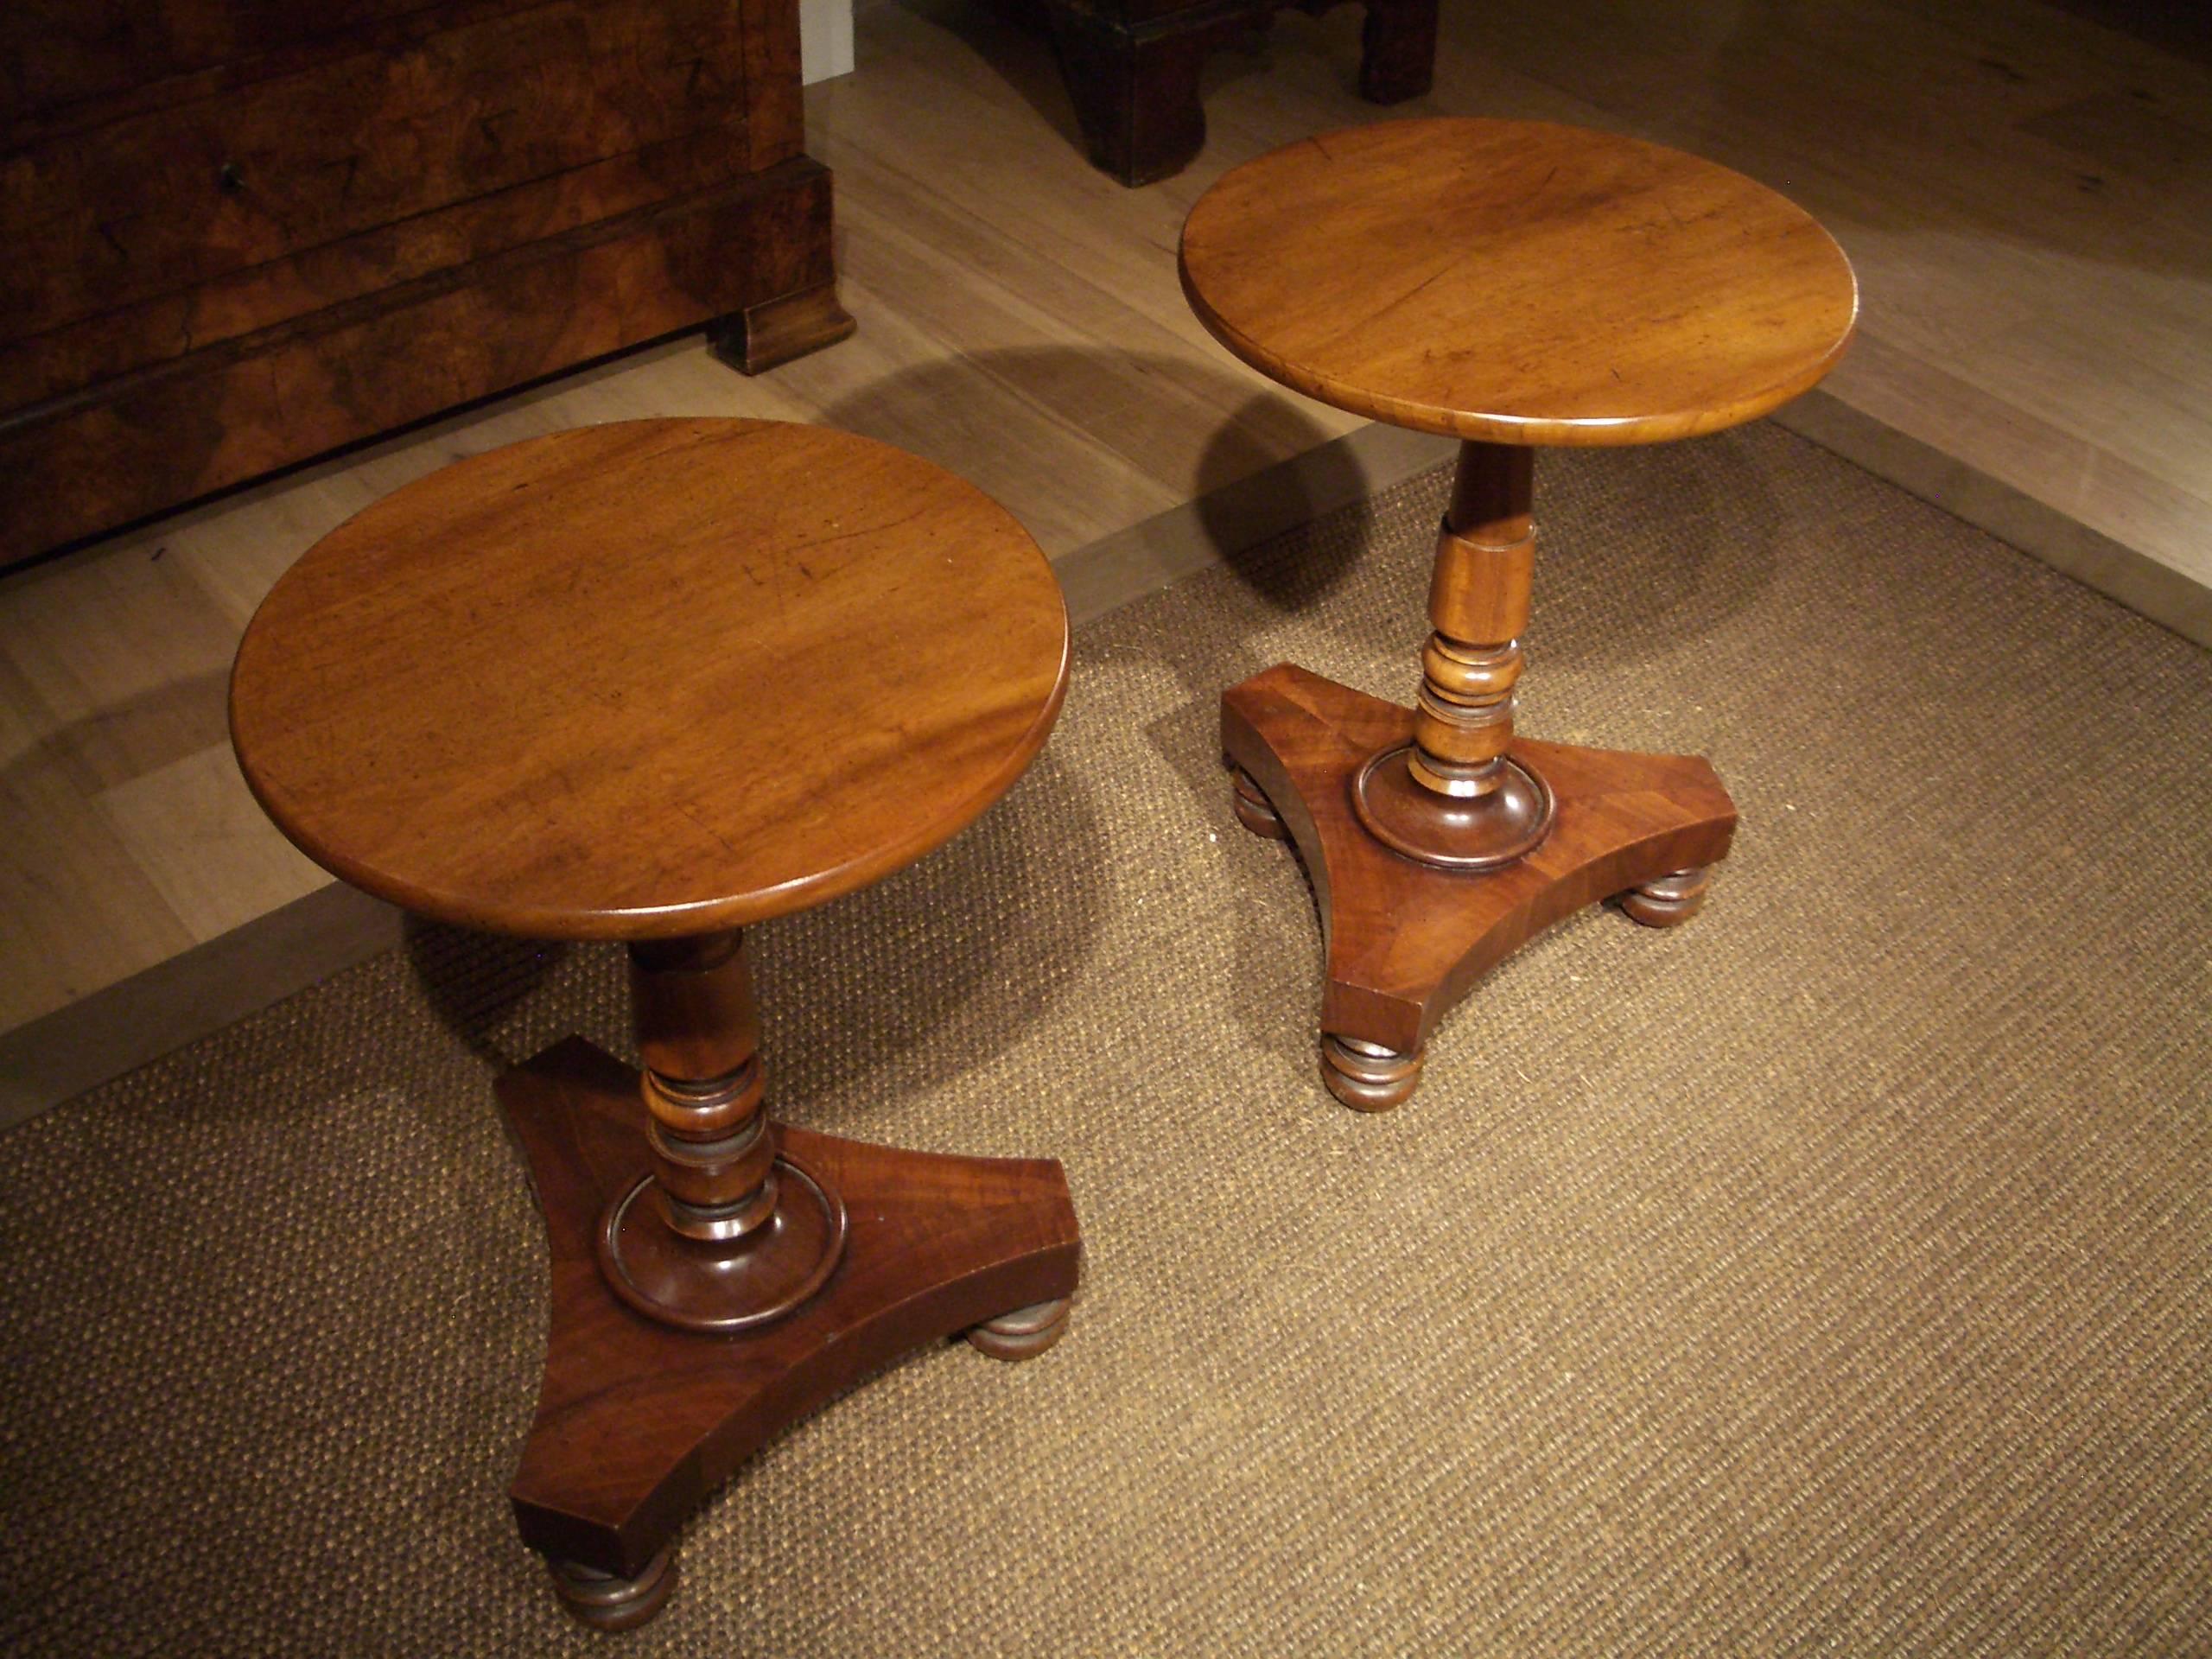 Beautiful set antique mahogany round tables in perfect condition. Beautiful warm color. Very special to have two identical tables.
Origin: England
Duration: circa 1860
Size: Diameter 40cm, height 53cm.